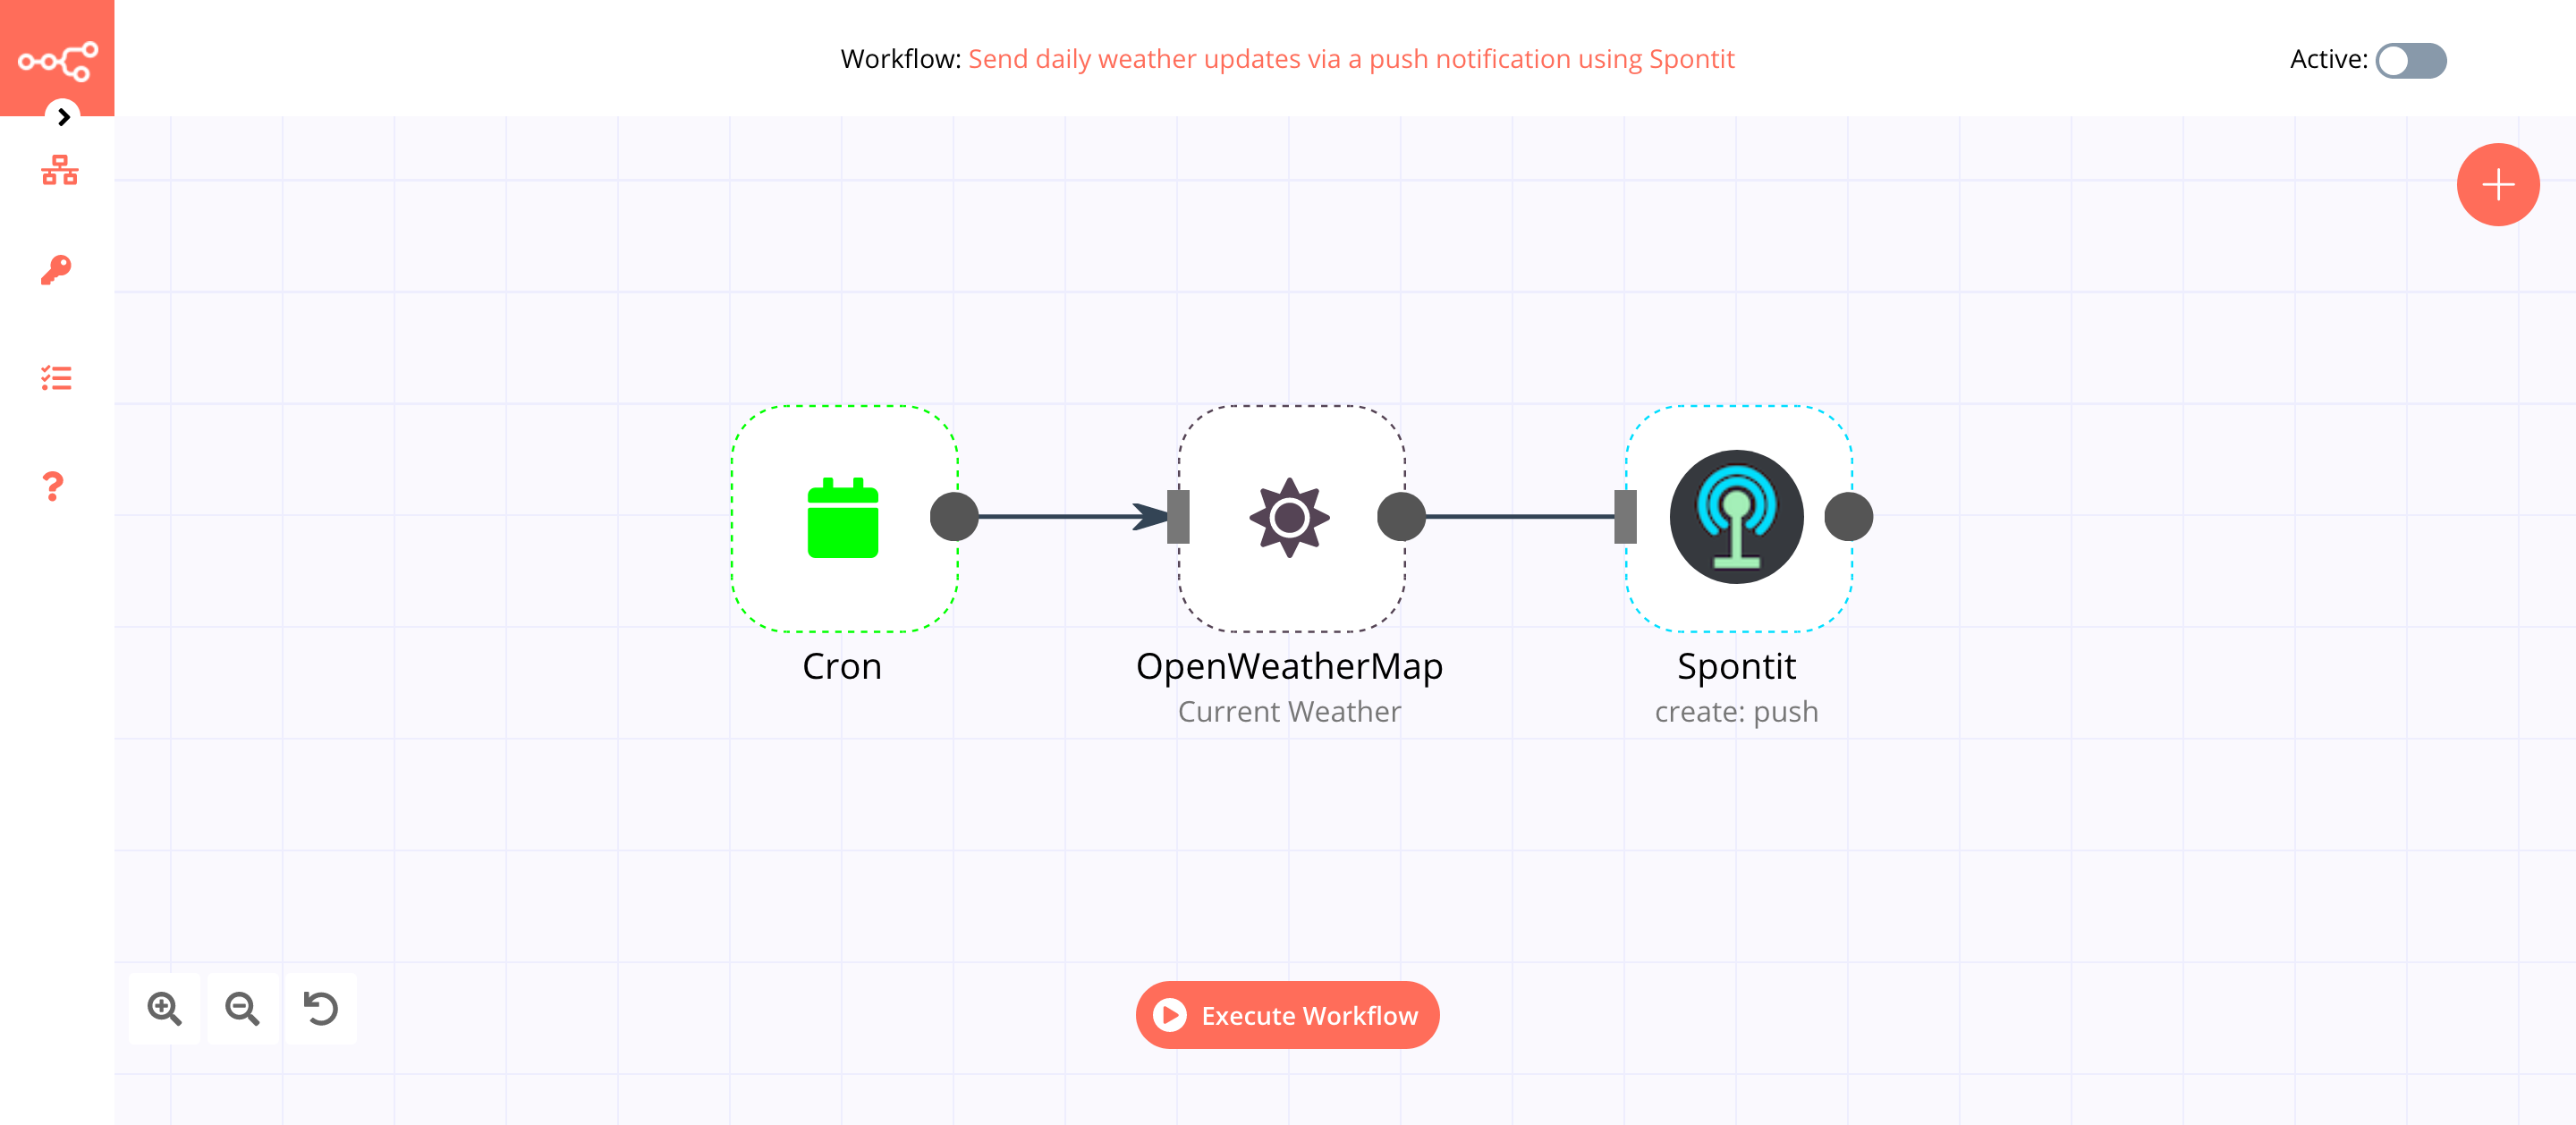 A workflow with the Spontit node